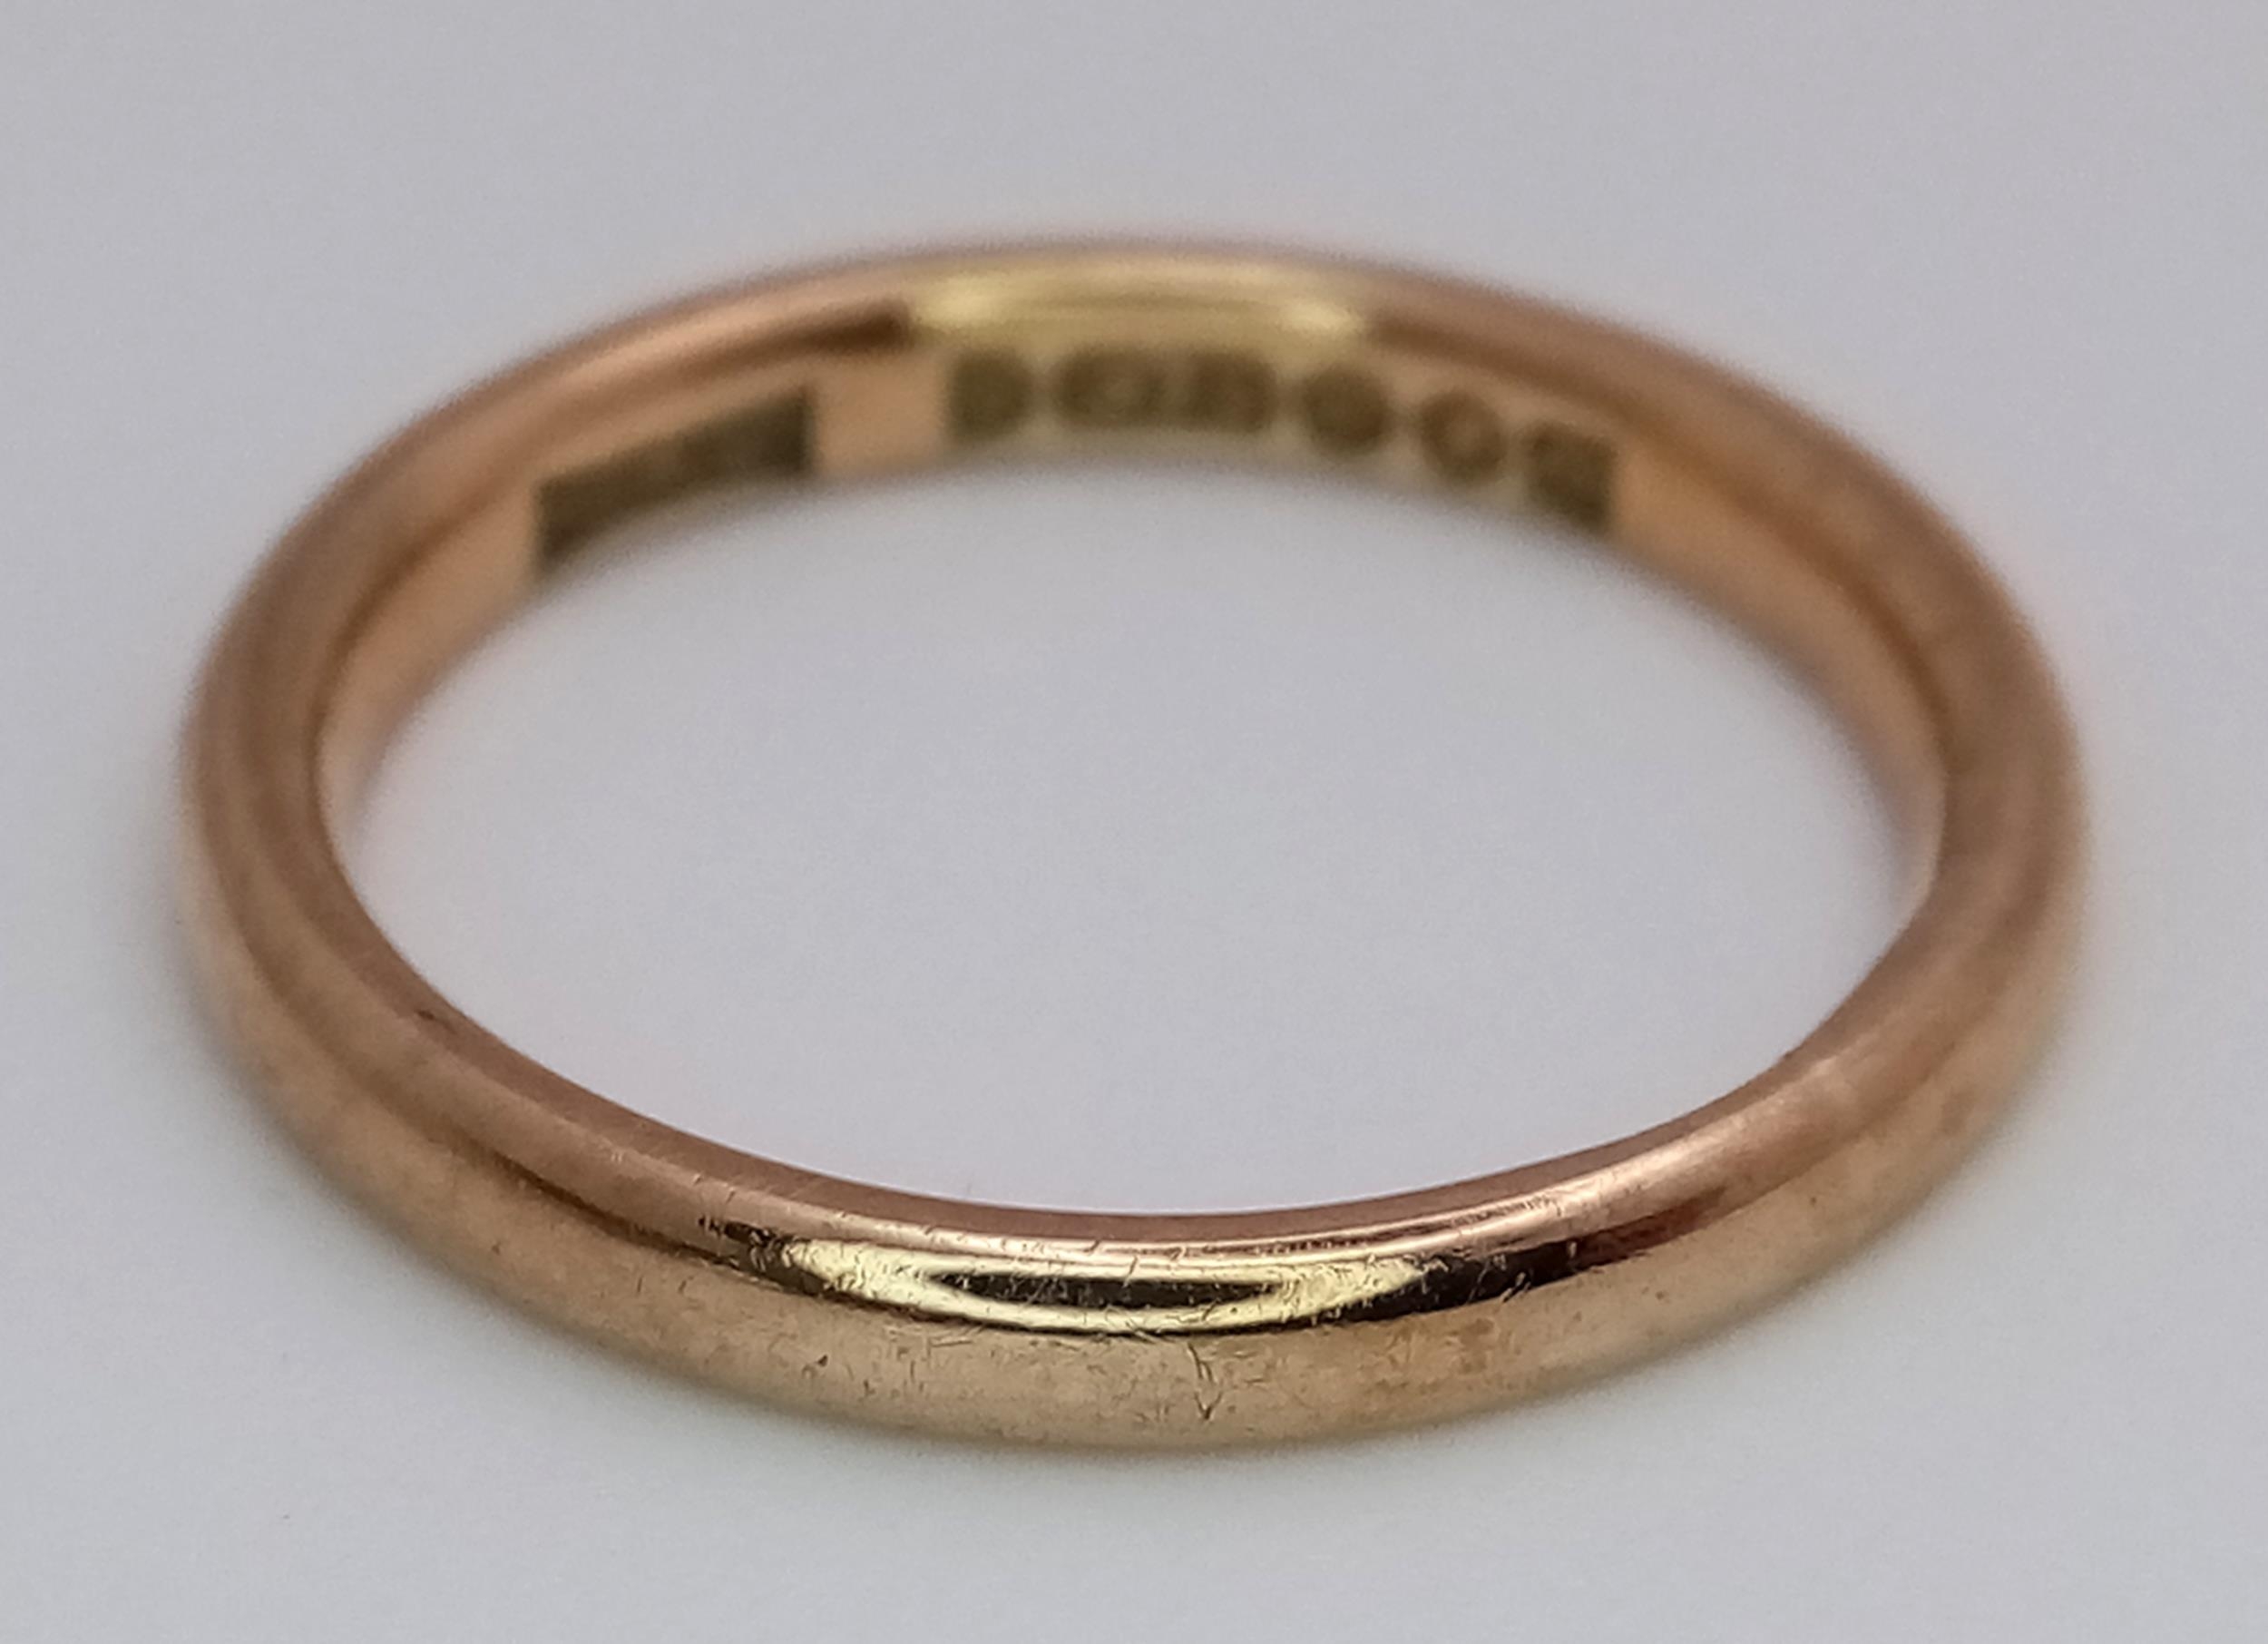 A Classic Vintage 9K Gold Band Ring. Full UK hallmarks. 2mm. Size L. 2.1g - Image 4 of 6